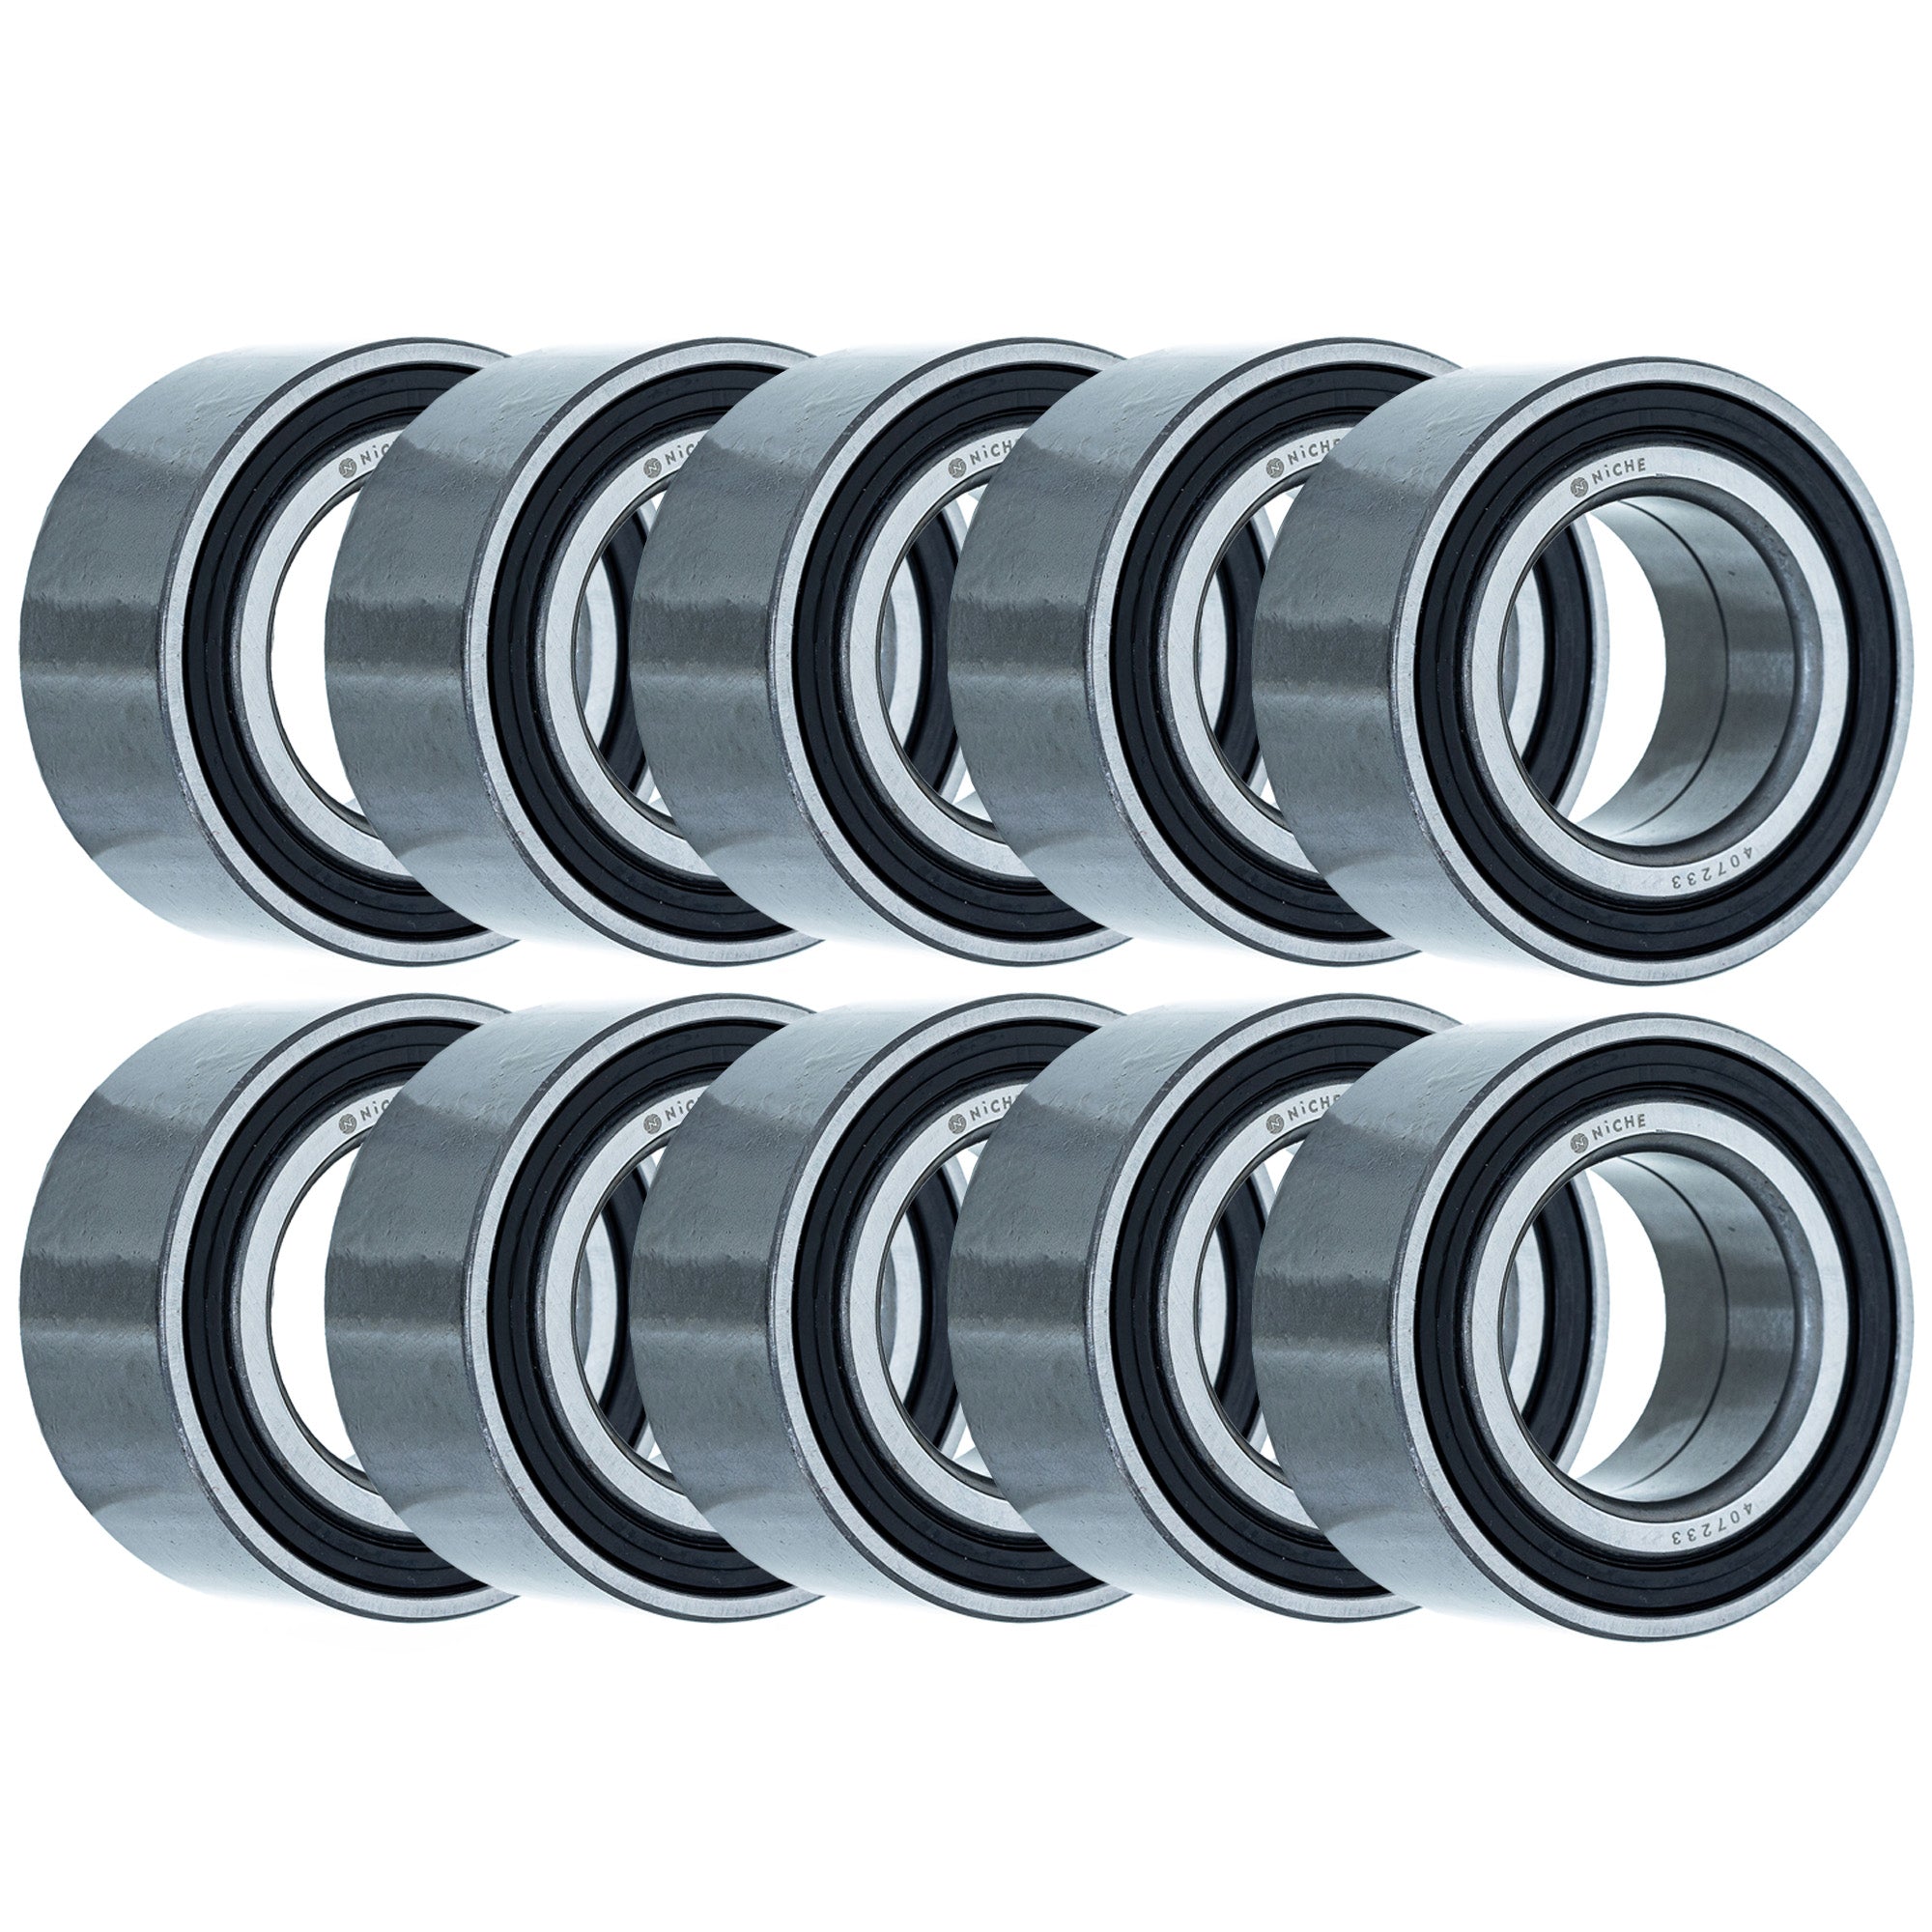 Double Row, Angular Contact, Ball Bearing Pack of 10 10-Pack for zOTHER Polaris RZR NICHE 519-CBB2292R